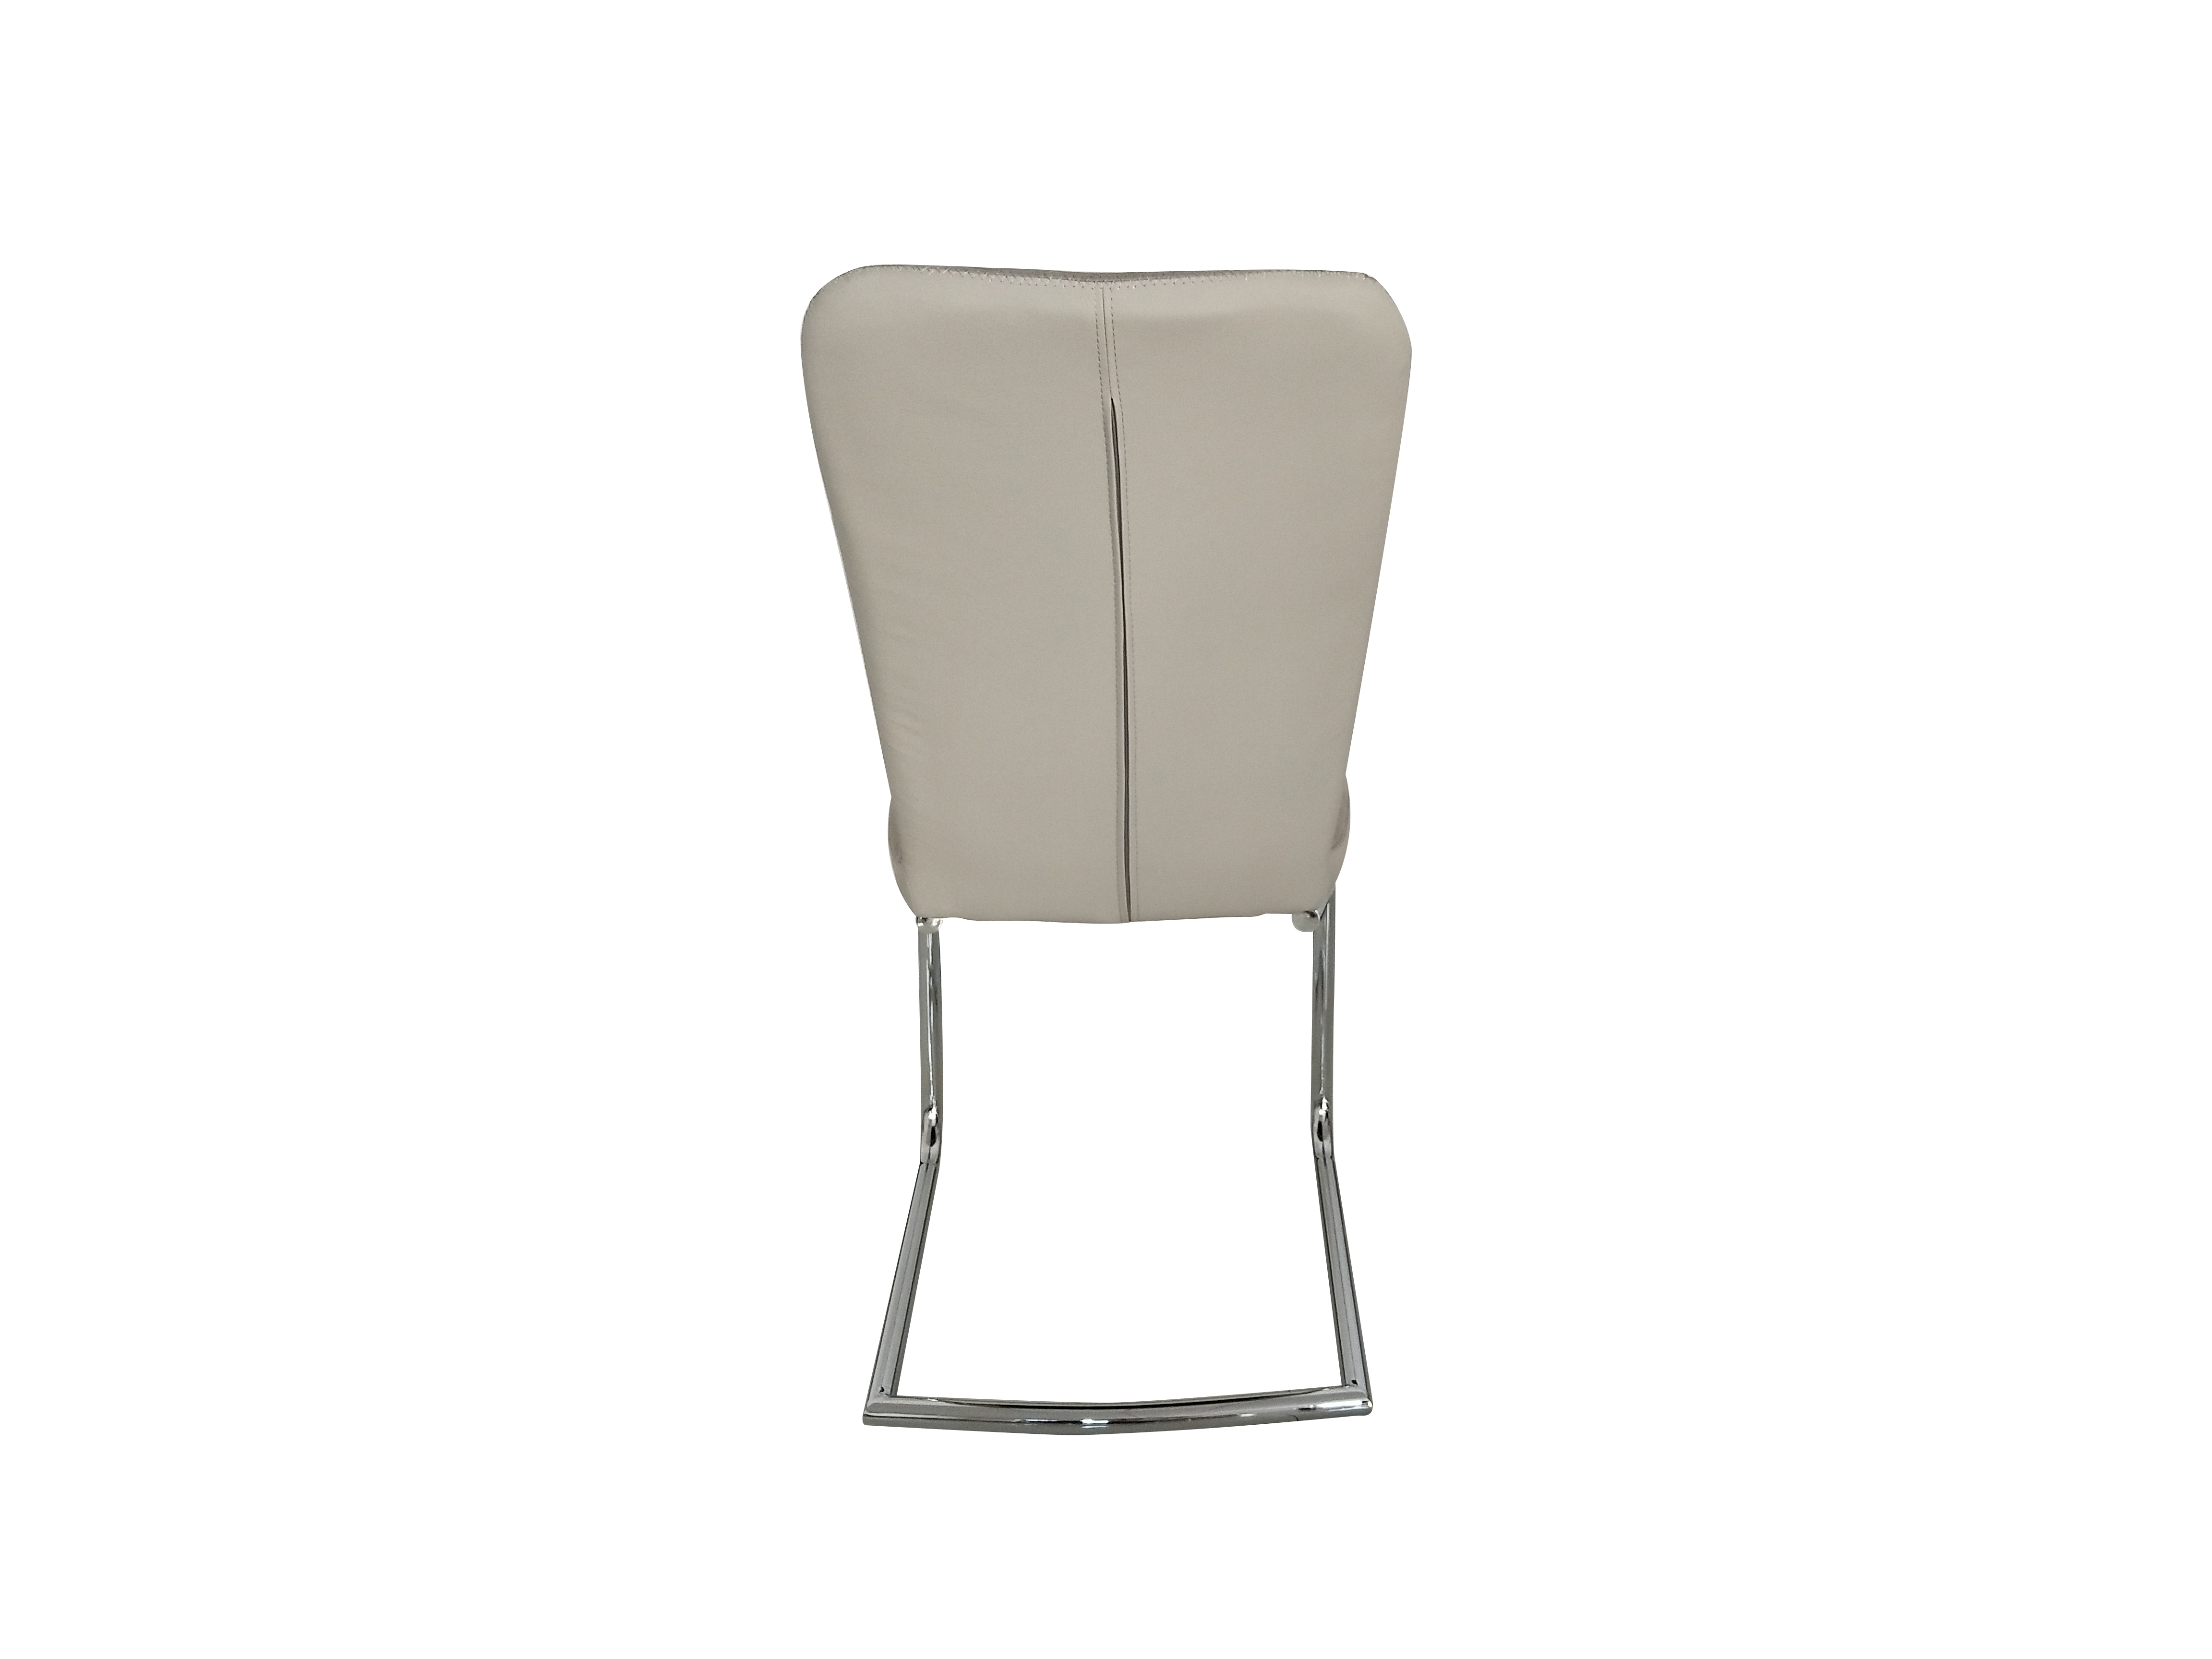 2020 New design dining chair